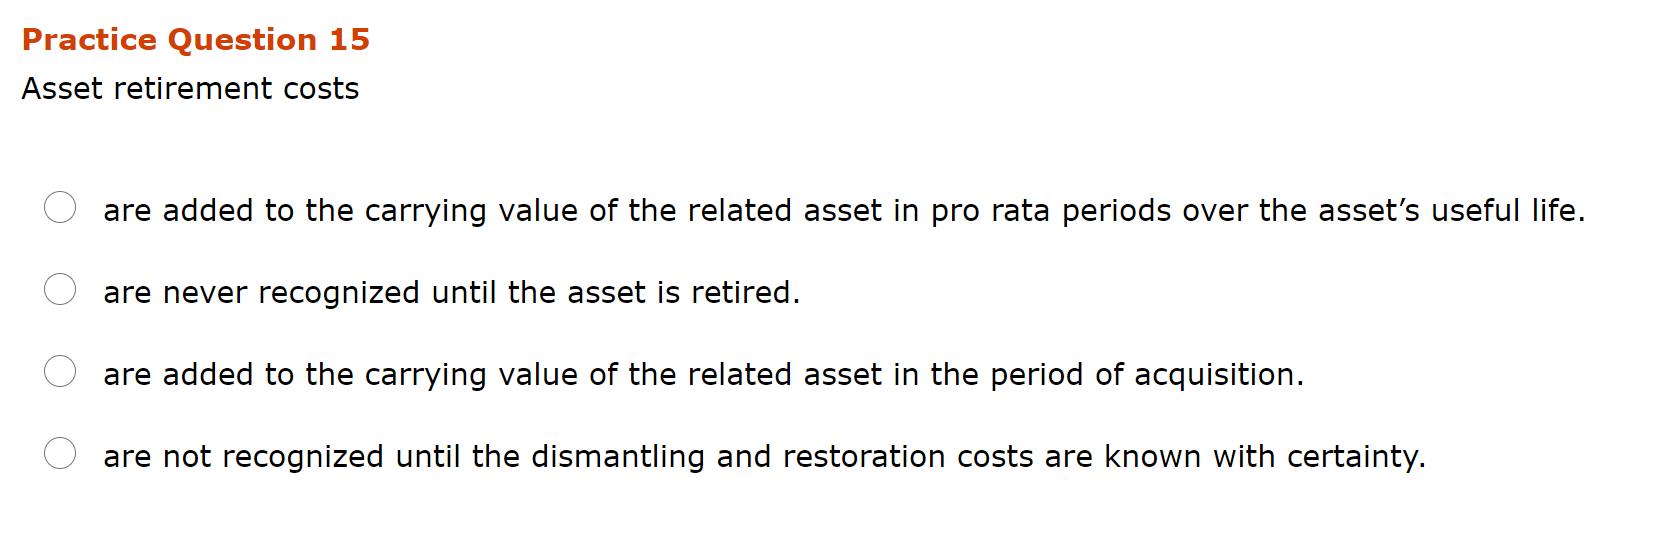 Practice Question 15 Asset retirement costs are added to the carrying value of the related asset in pro rata periods over the